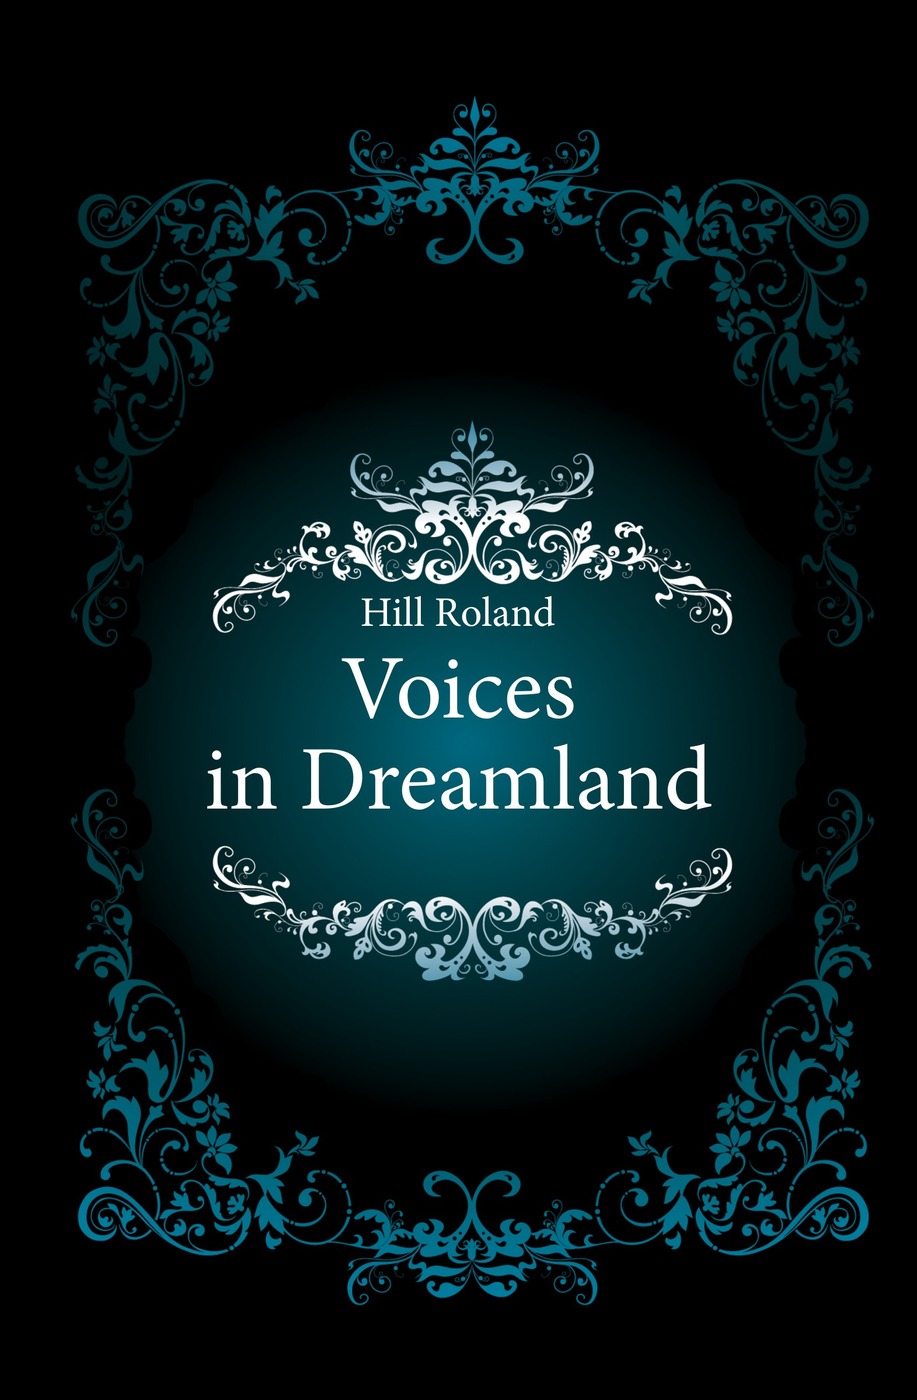 Voices in Dreamland